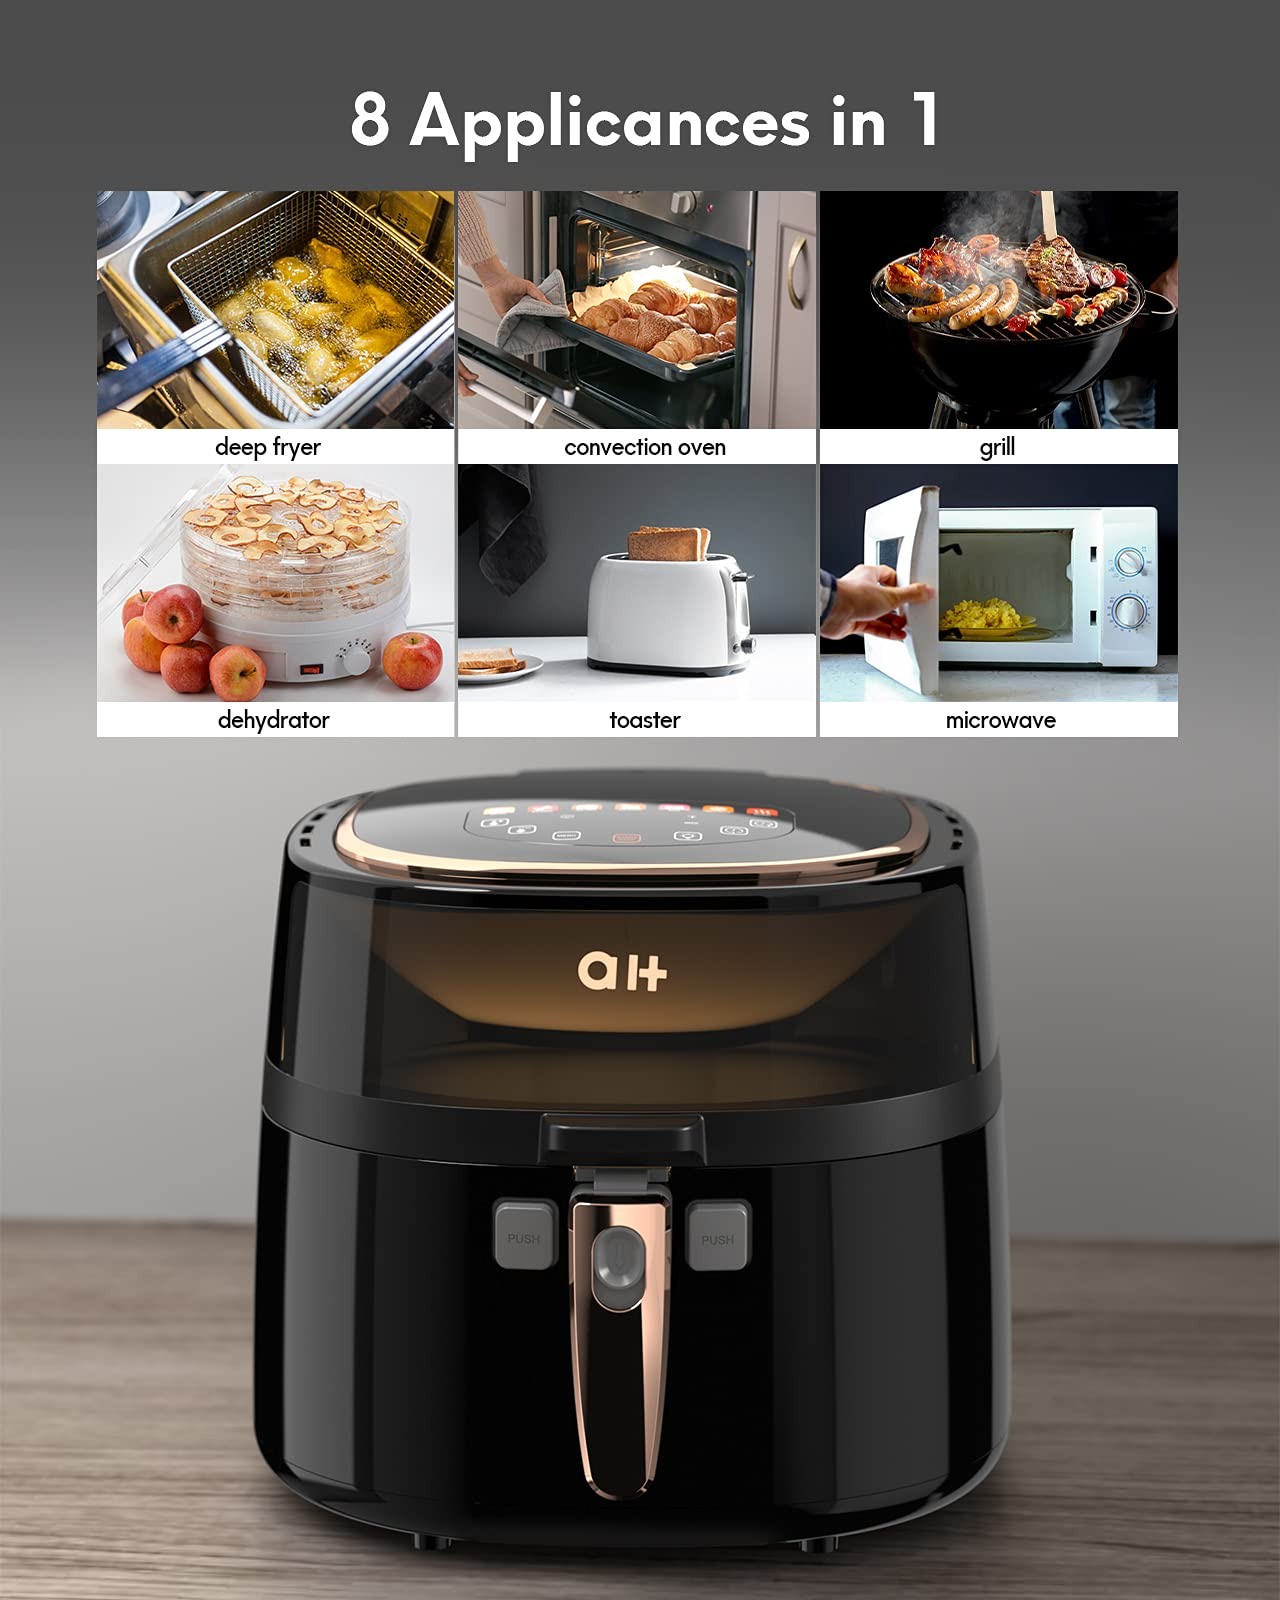 Qualeben 8-in-1 Air Fryer, 6QT Large Family Size Oven Oilless